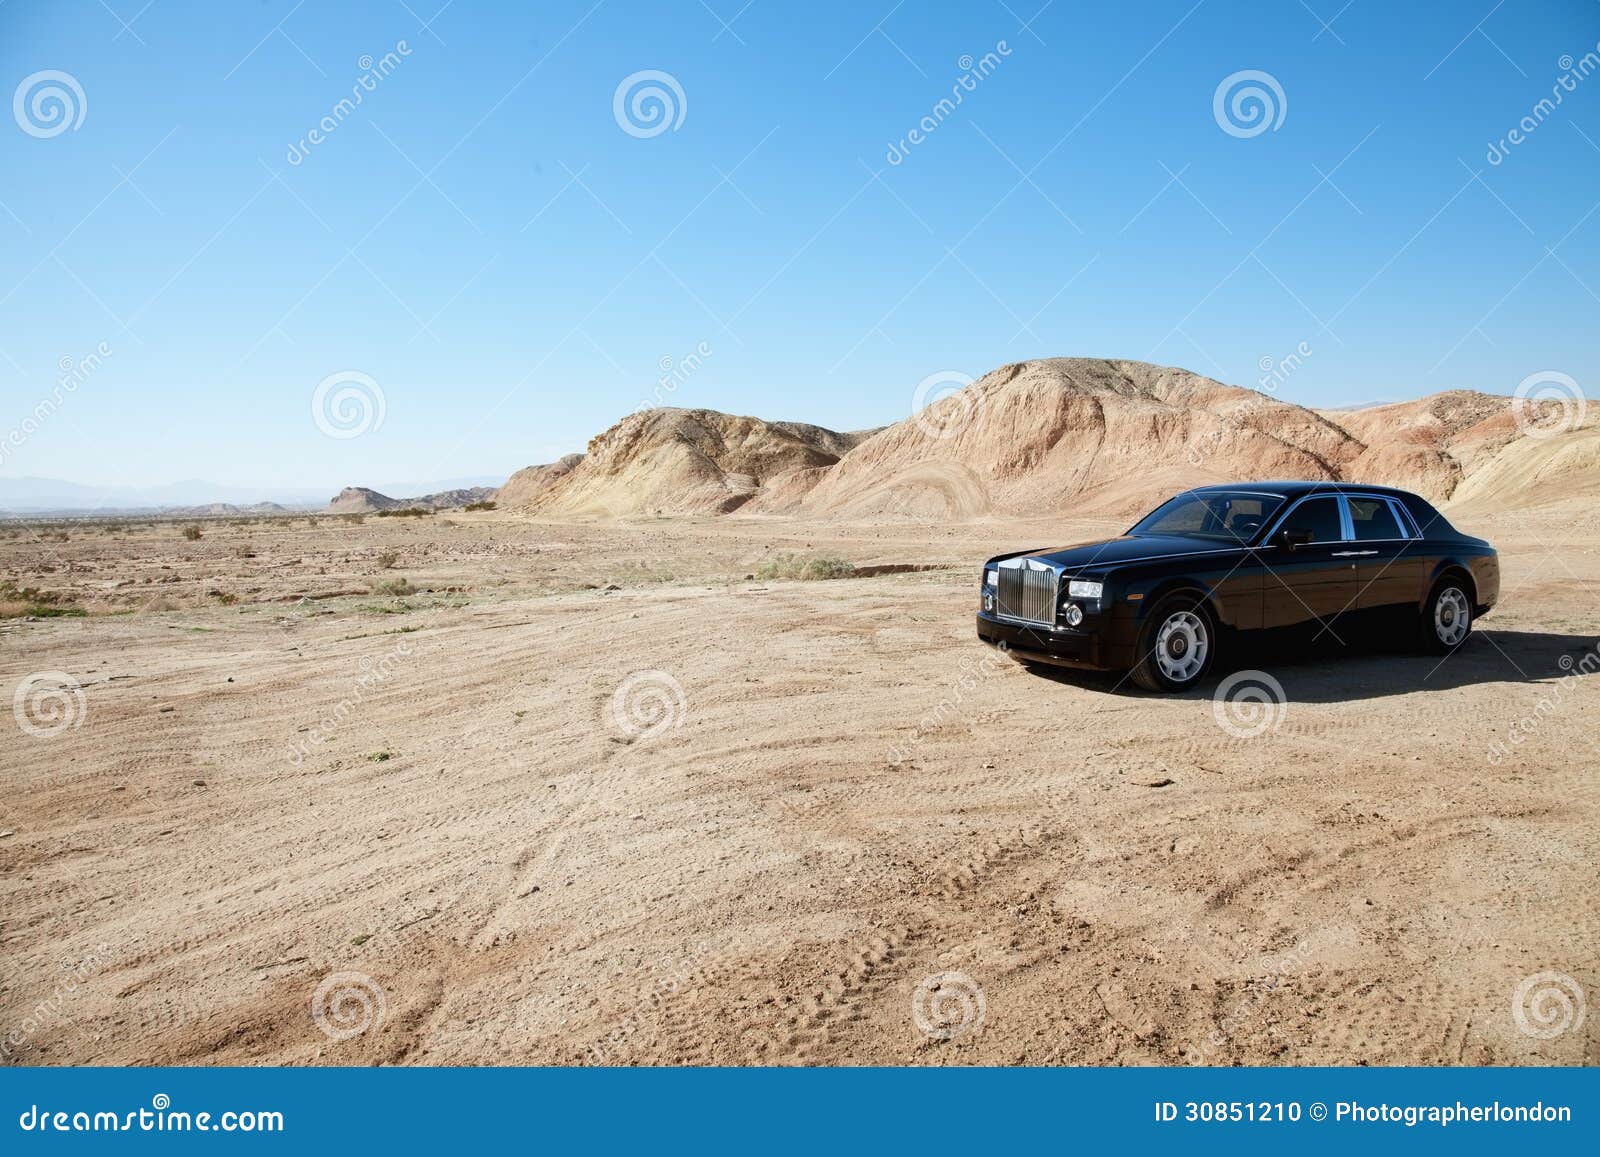 rolls royce car parked on unpaved road in front of mountains